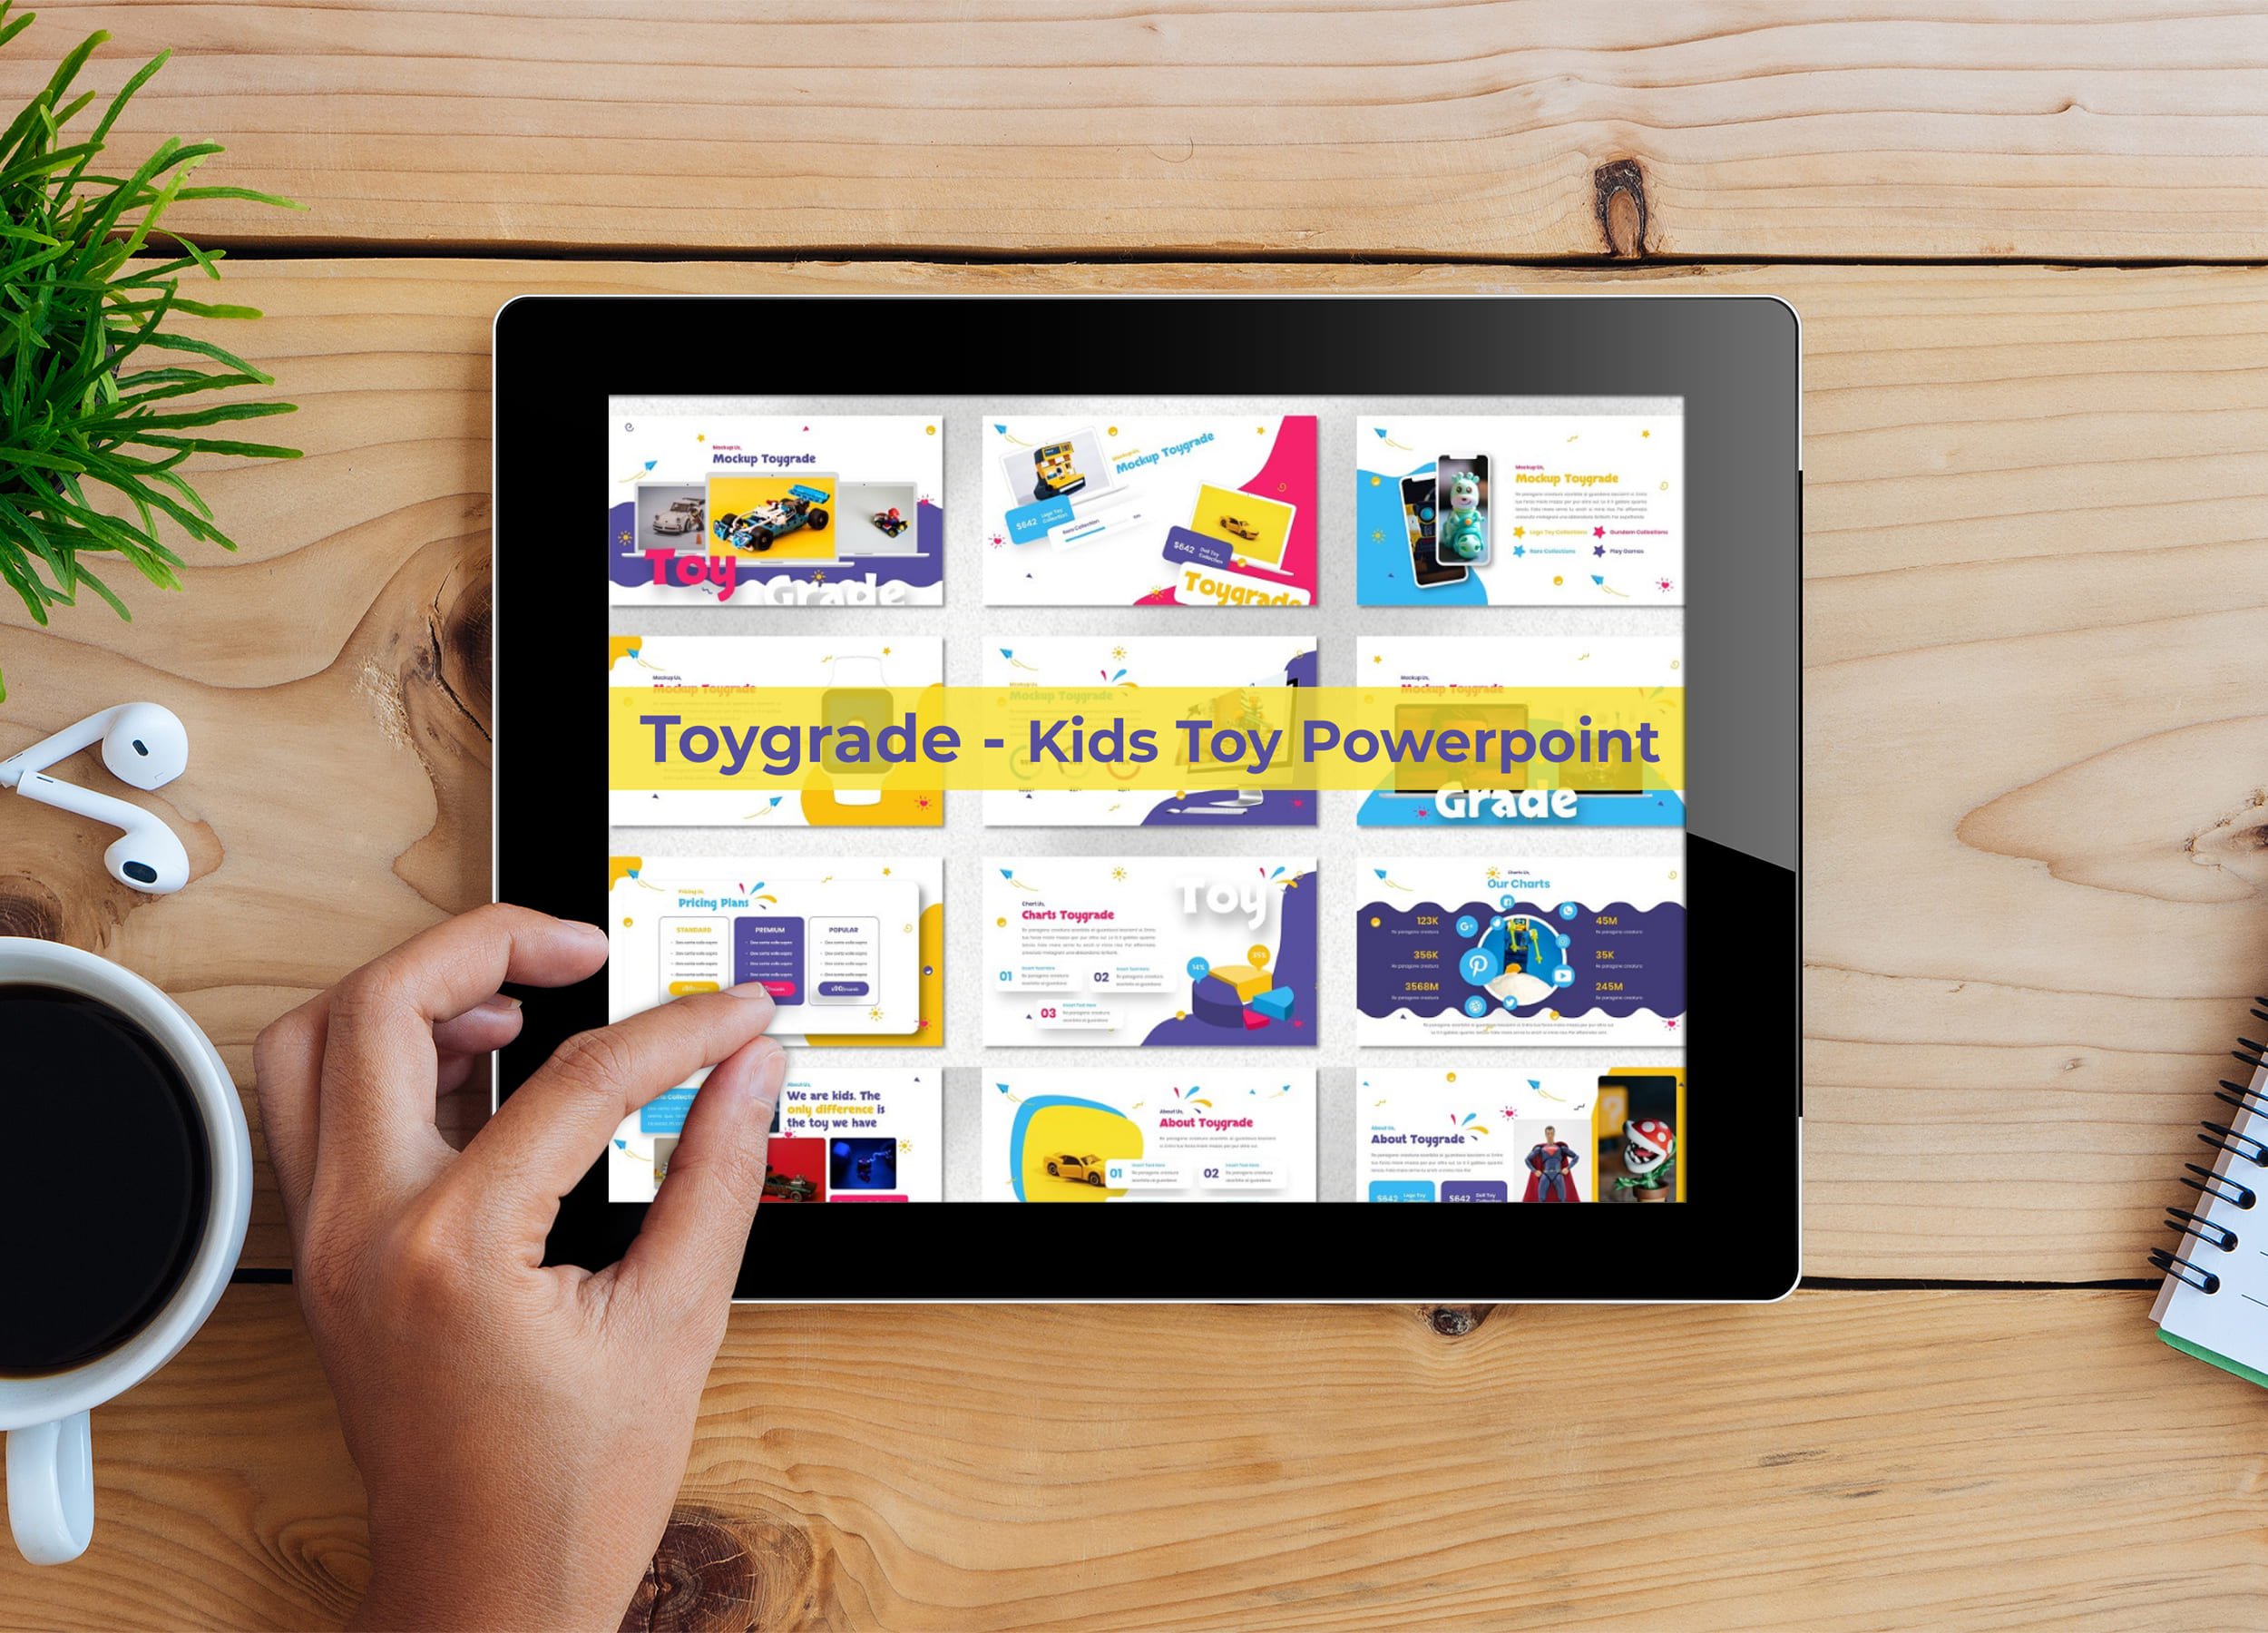 Tablet option of the Toygrade - Kids Toy Powerpoint.